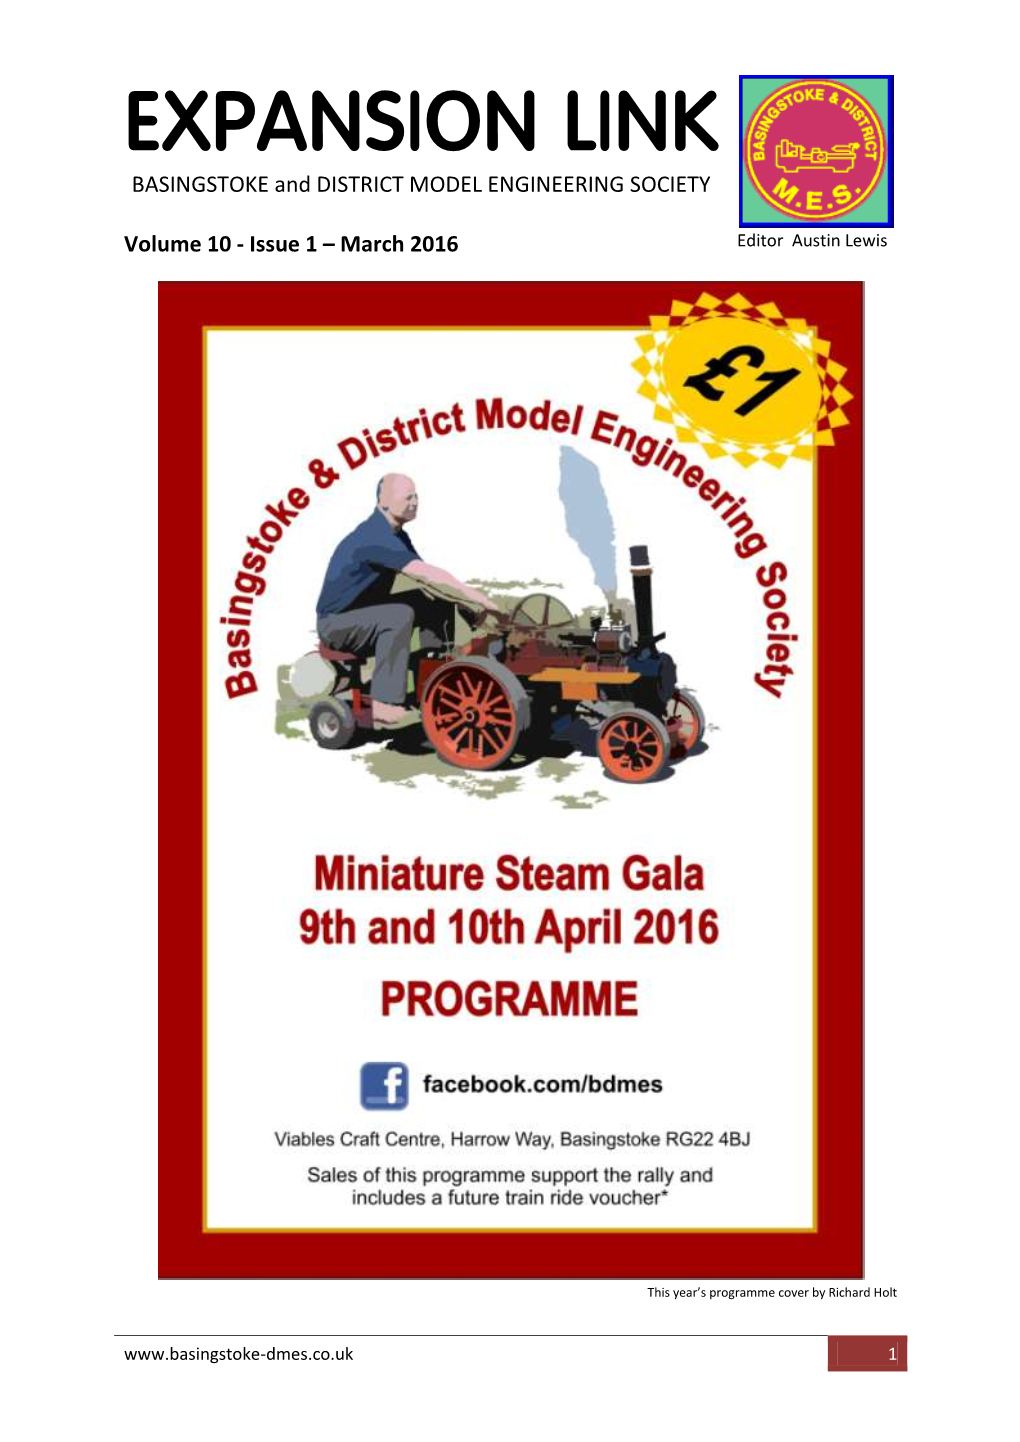 EXPANSION LINK BASINGSTOKE and DISTRICT MODEL ENGINEERING SOCIETY